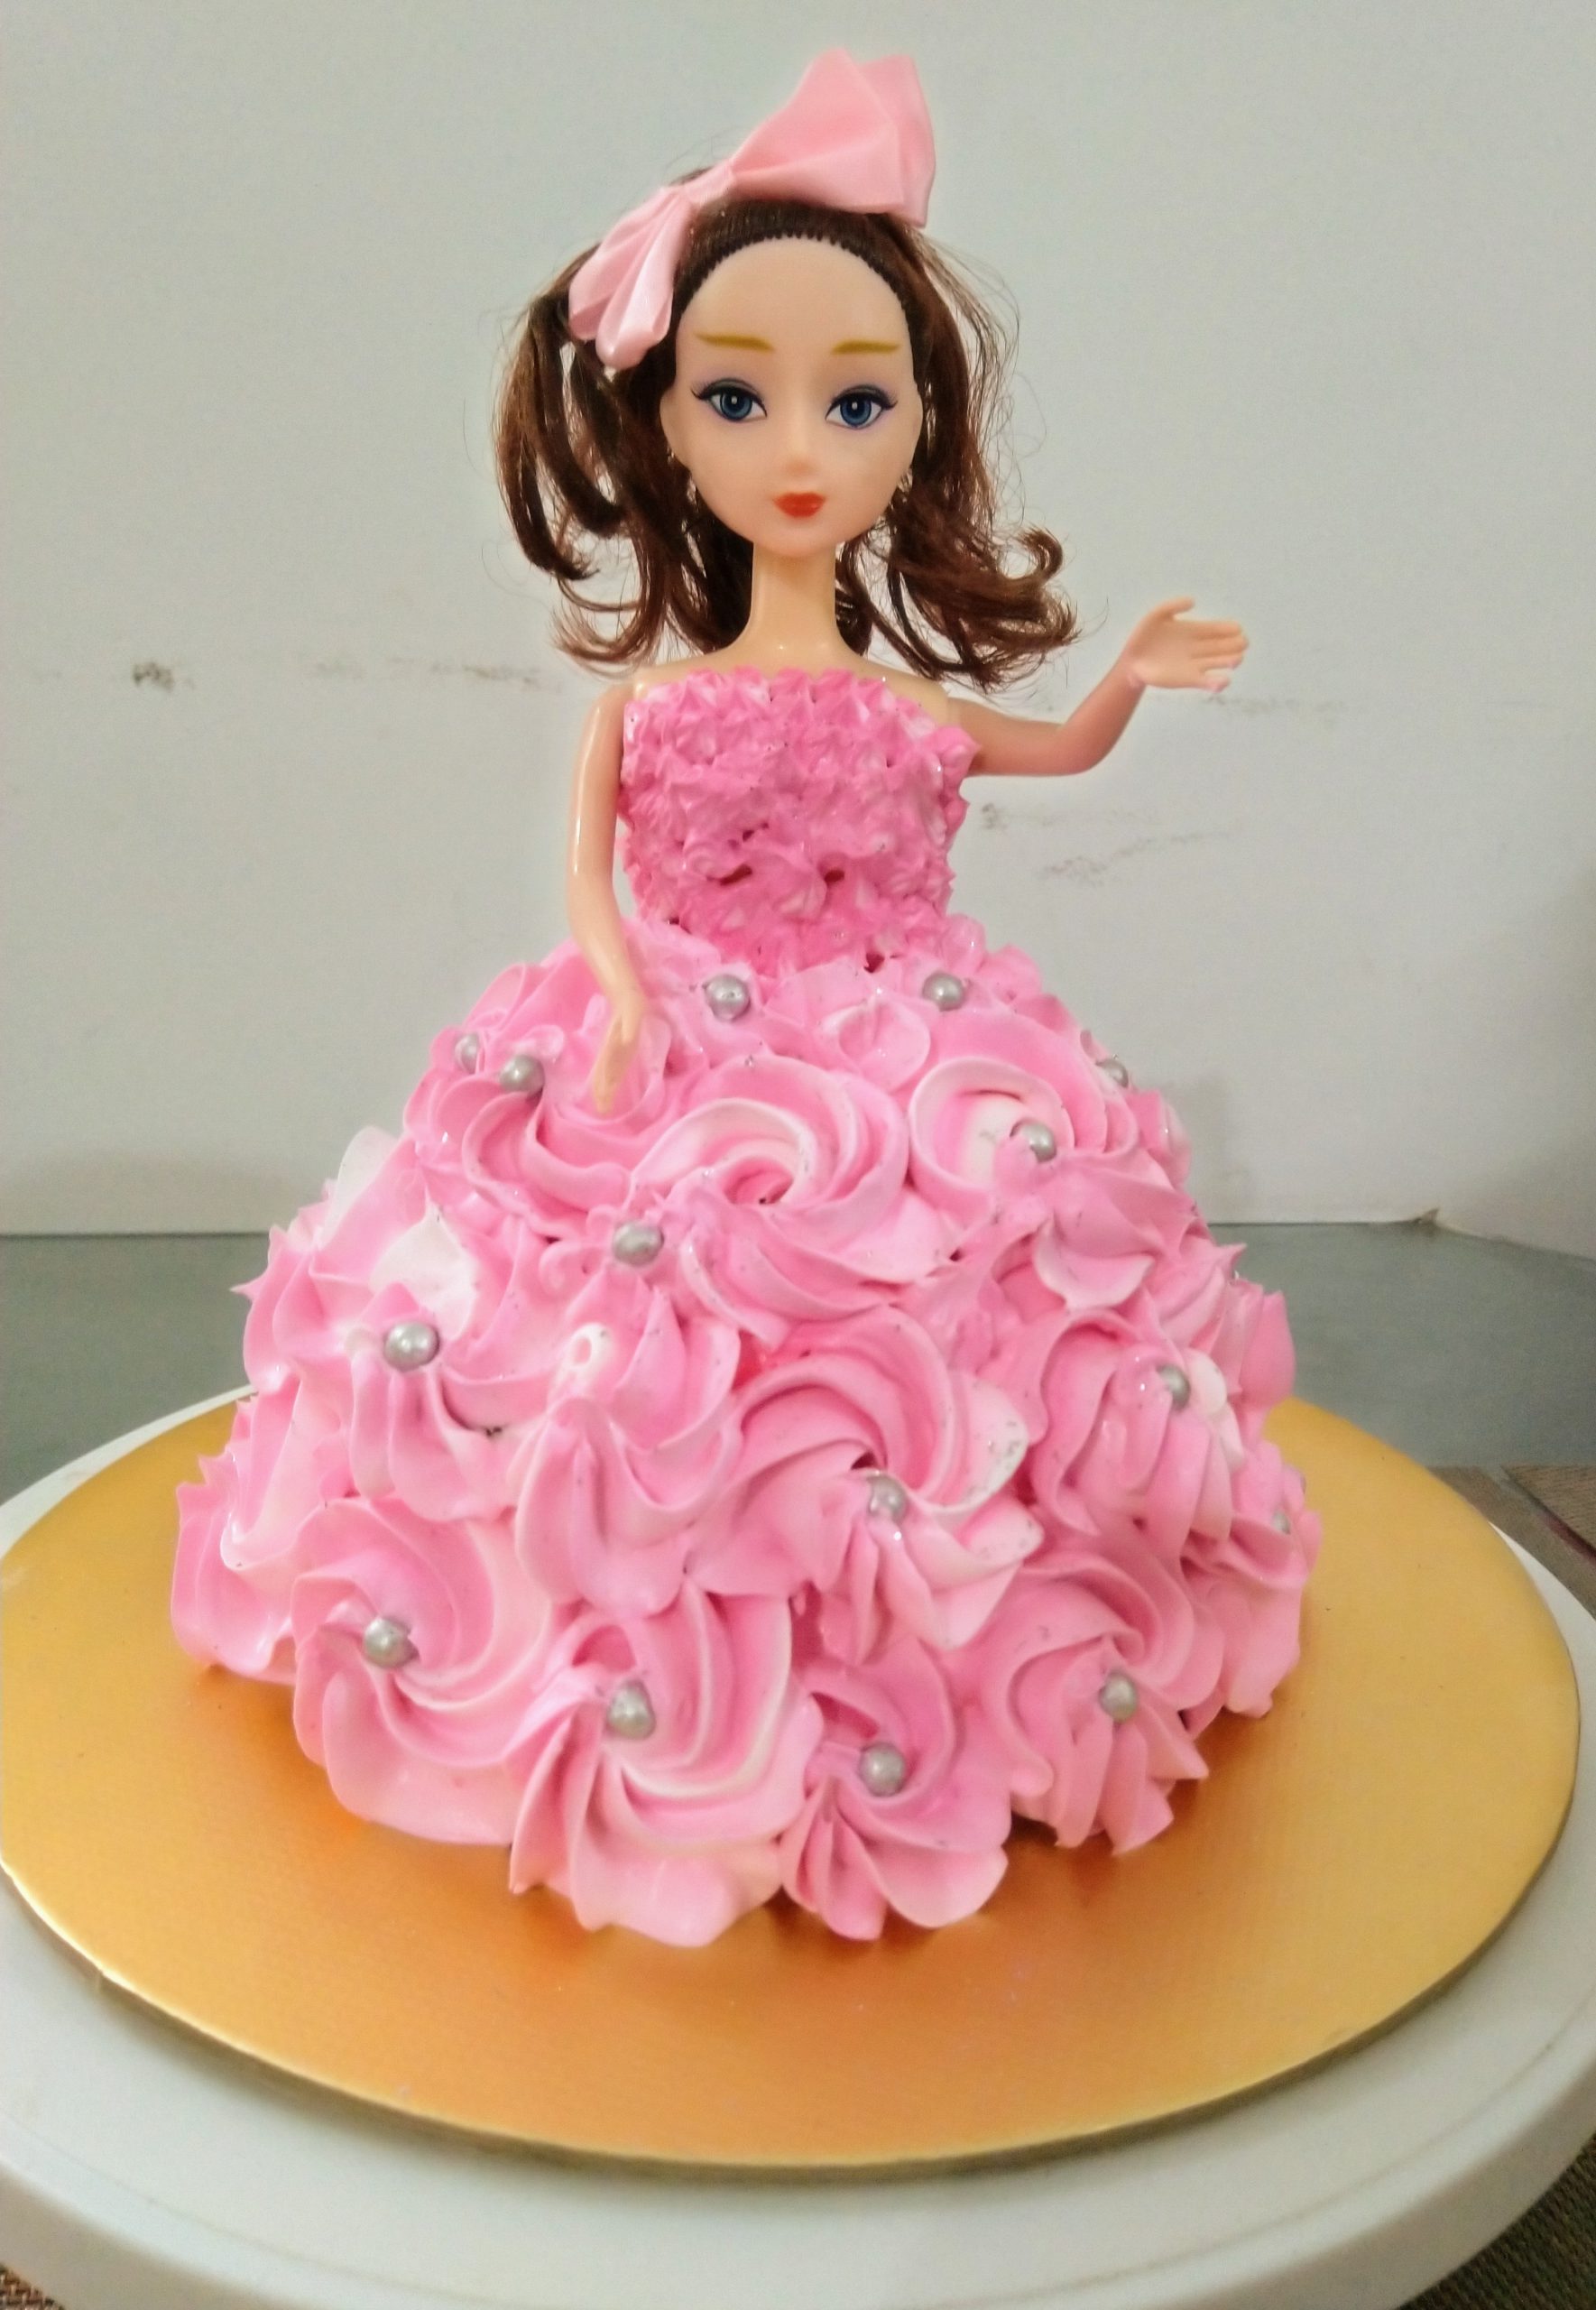 Doll Theme Cake Designs, Images, Price Near Me